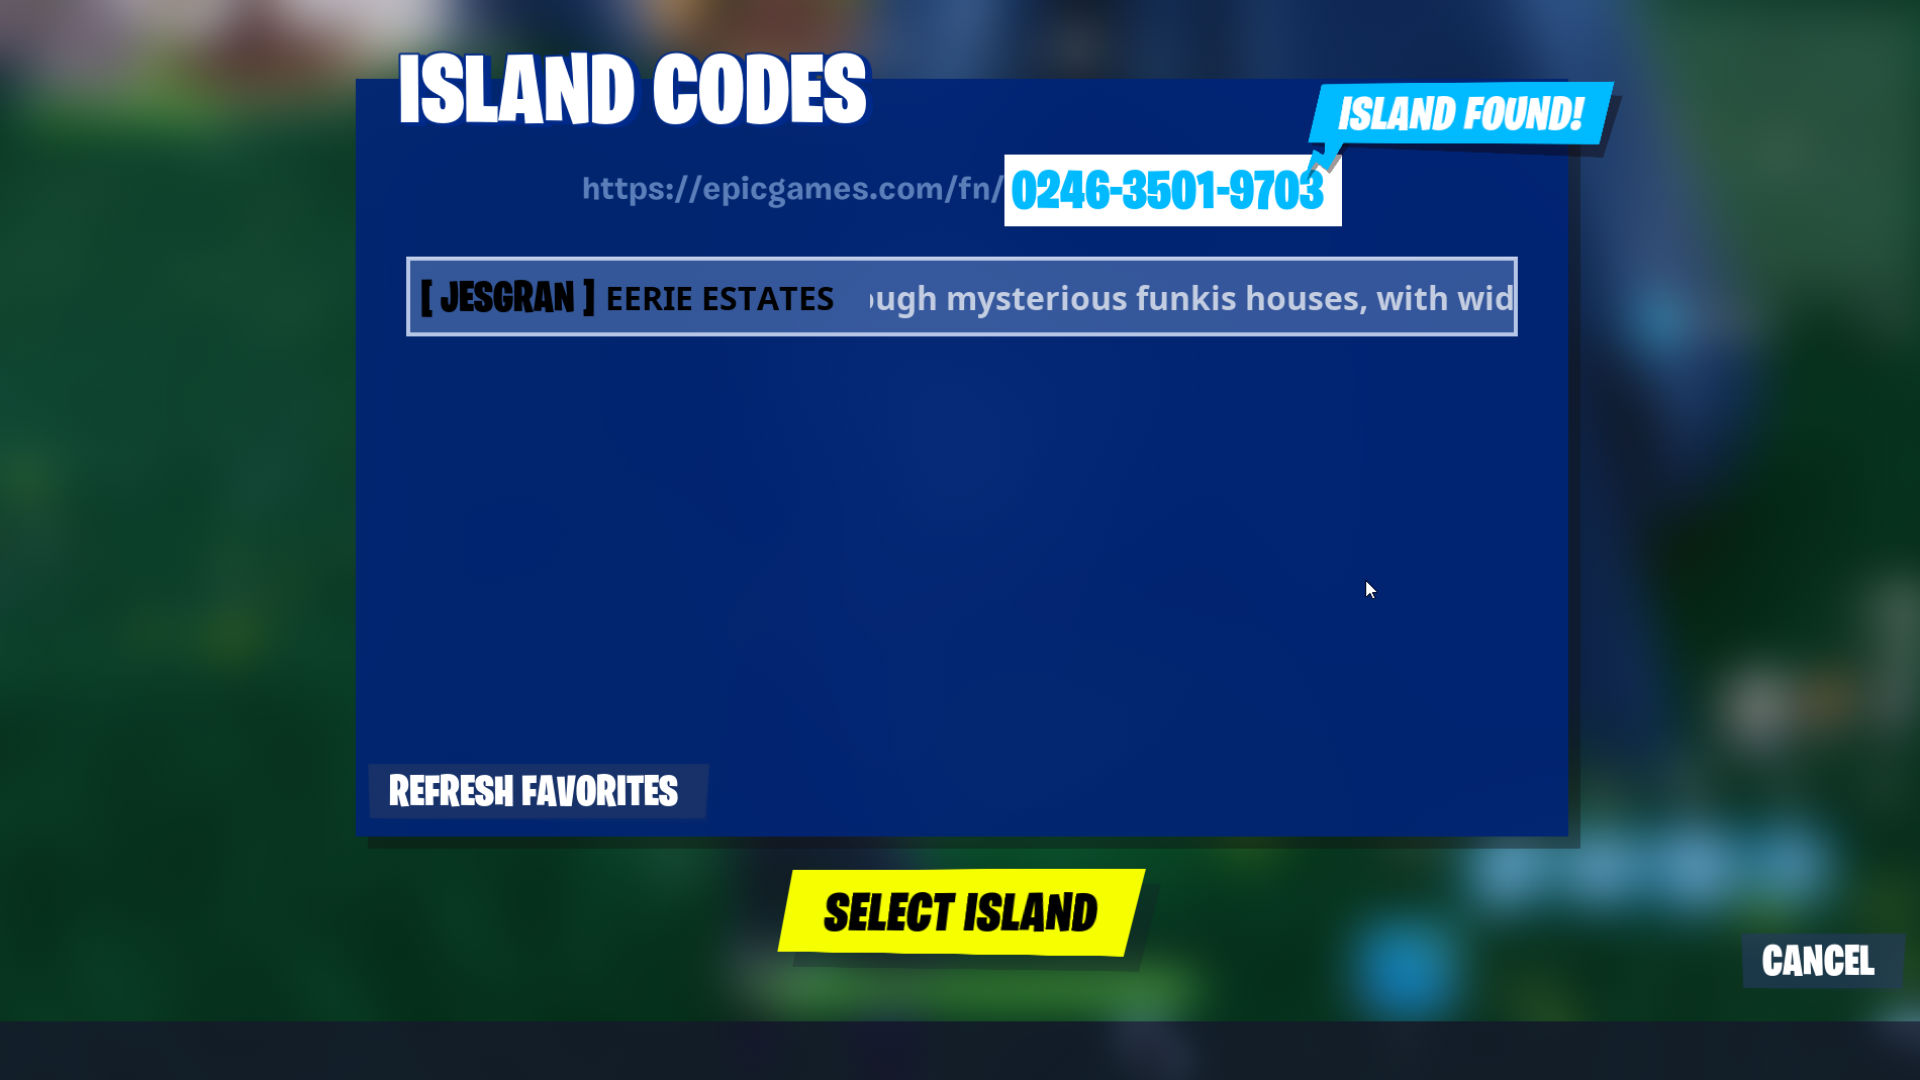 fortnite island codes found - what is the code for fortnite dropper creative